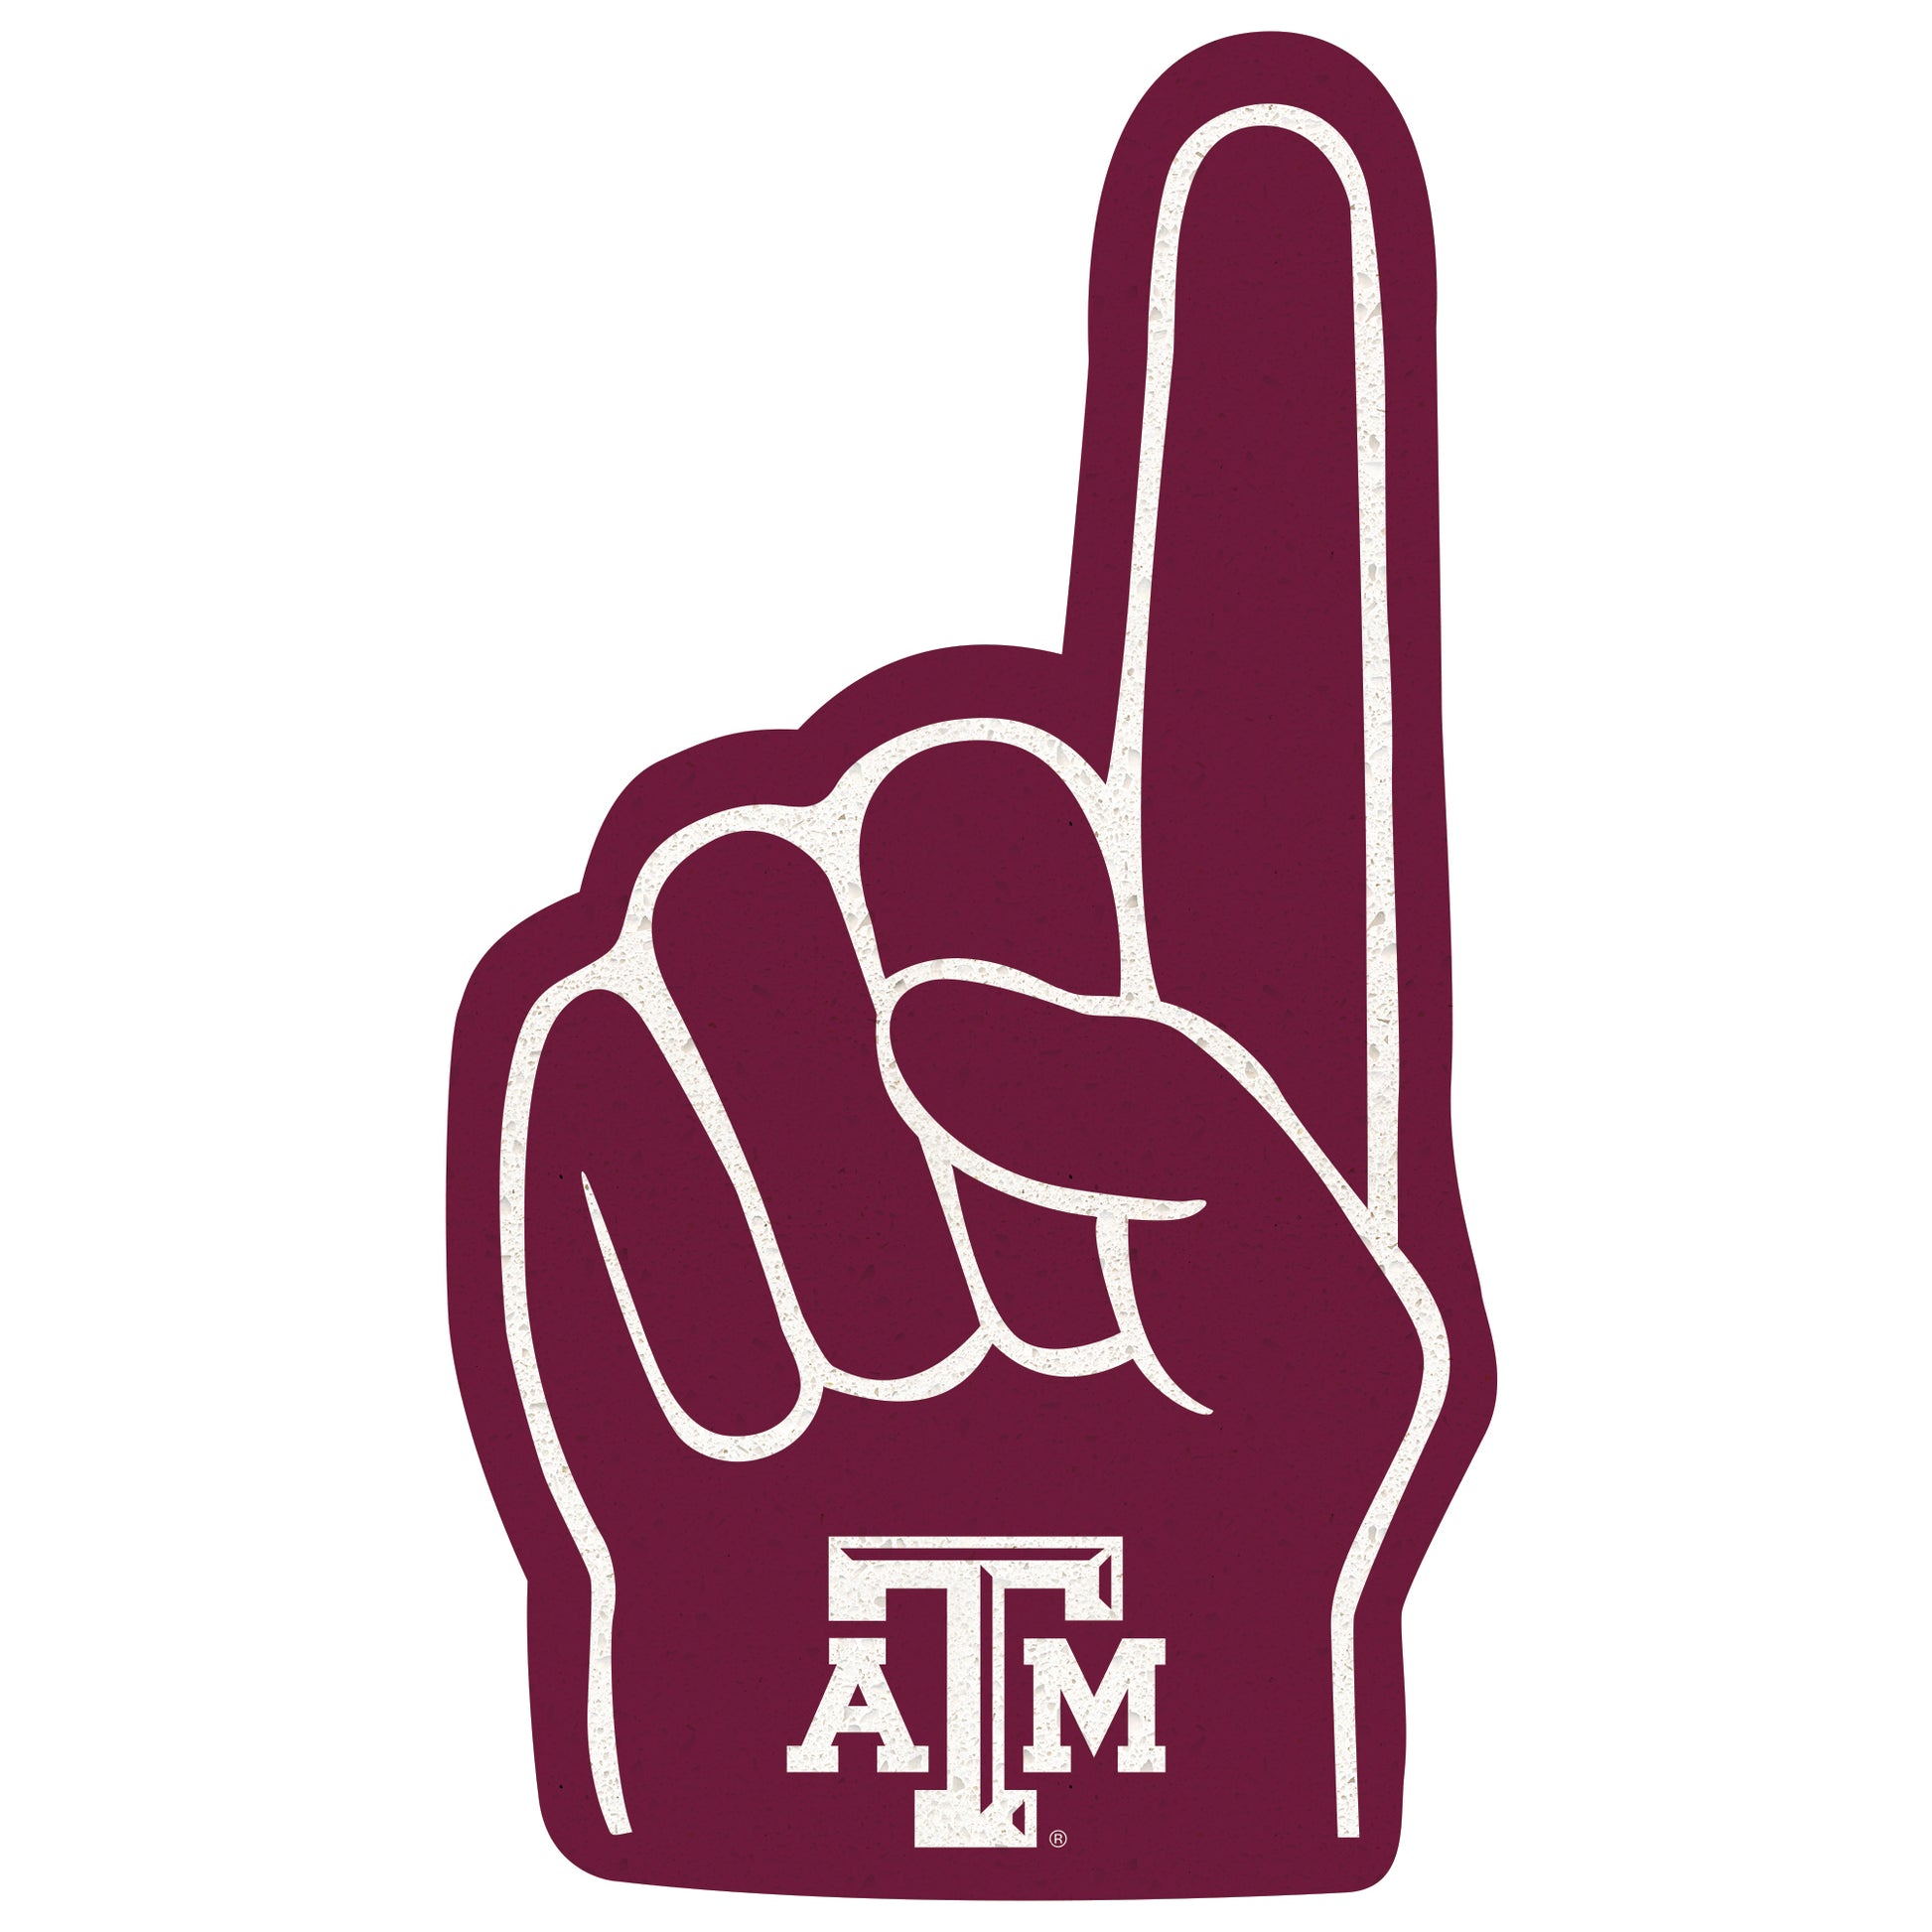 Texas A&M Aggies: 2021 Foam Finger - Officially Licensed NCAA Removabl –  Fathead